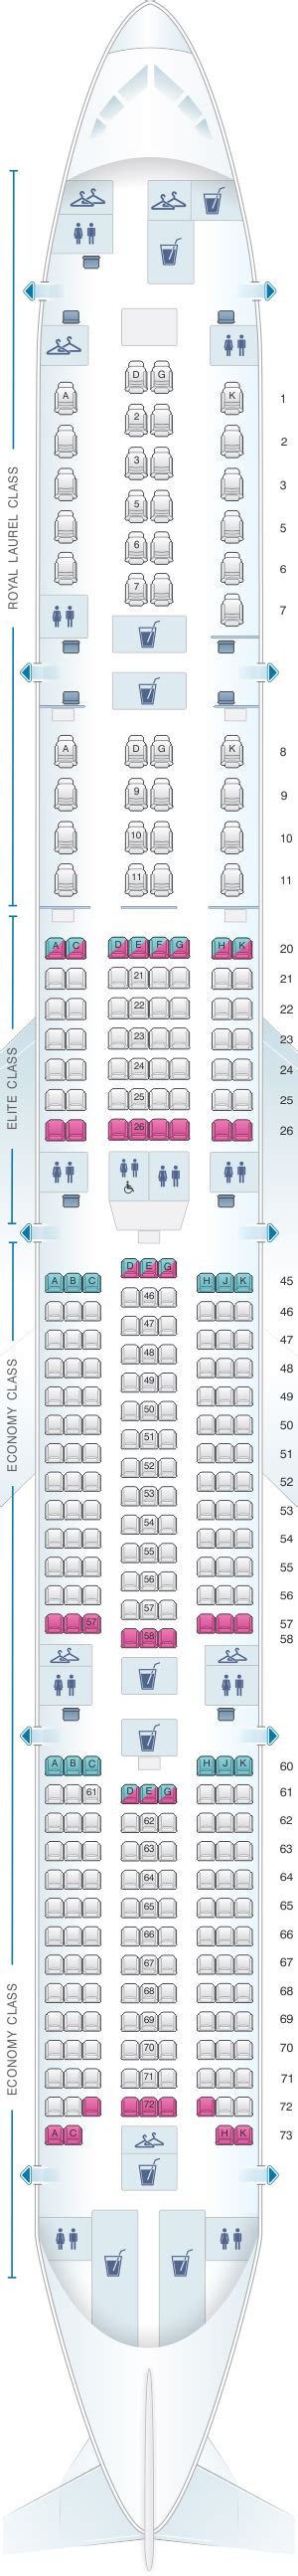 Seat Map Air New Zealand Boeing B Er Seatmaestro Porn Sex Picture